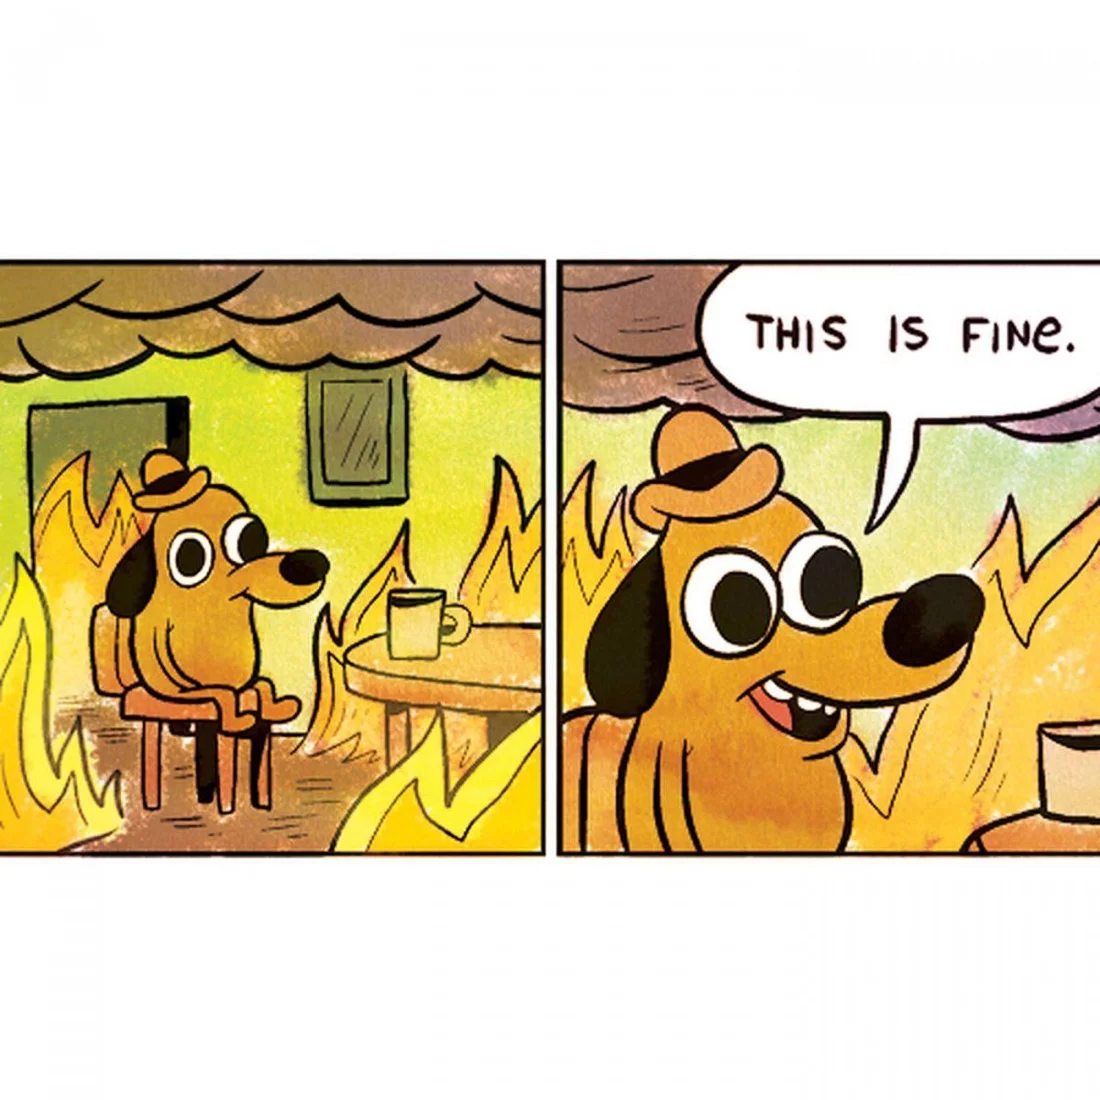 This is fine0